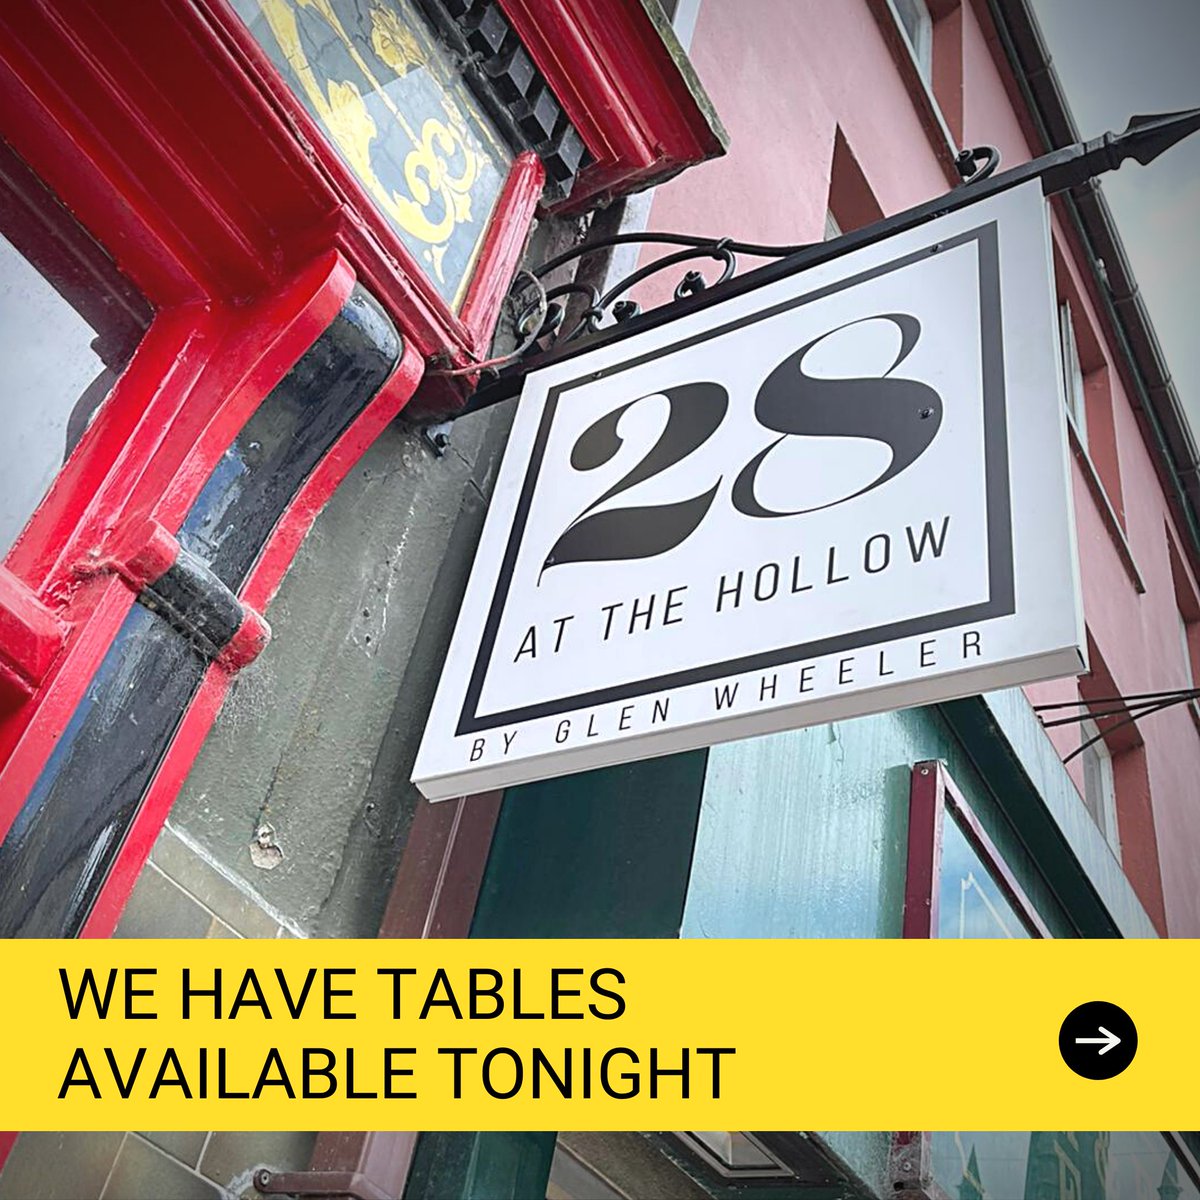 Tables available tonight... Start your weekend off with a treat and a night out with 28. We have some tables that have just become available tonight so please get in touch to book!